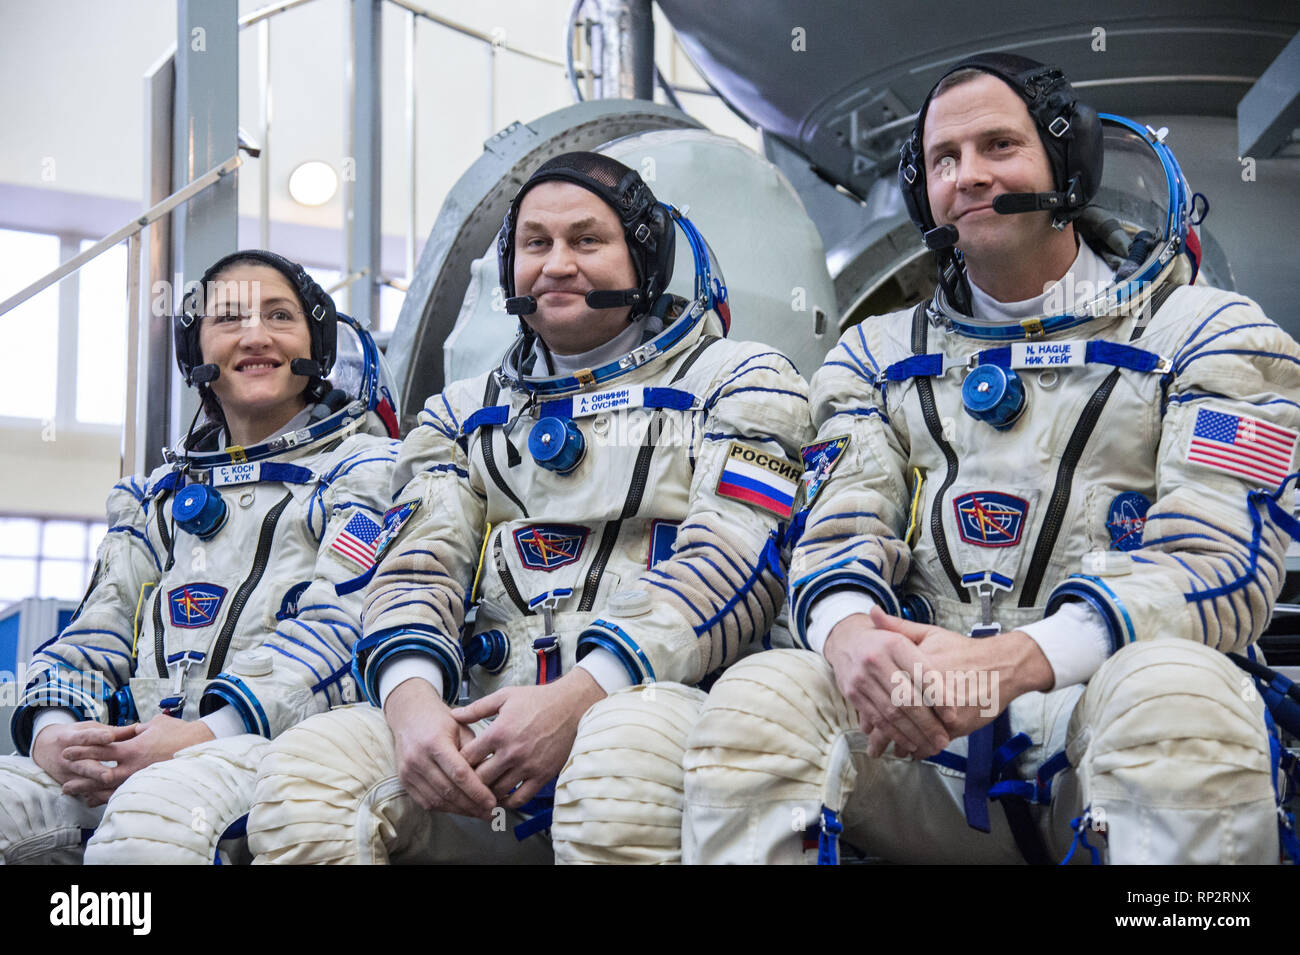 Star City, Russia. 20th Feb, 2019. International Space Station Expedition 59 crew members talk with the media on their Soyuz spacecraft simulator February 20, 2019 at Star City, Russia. Left to right are: Christina Koch of NASA, Alexey Ovchinin of Roscosmos, and Nick Hague of NASA. They crew will launch March 14th from the Baikonur Cosmodrome in Kazakhstan on the Soyuz MS-12 spacecraft for a six-and-a-half month mission on the International Space Station. Credit: Planetpix/Alamy Live News Stock Photo